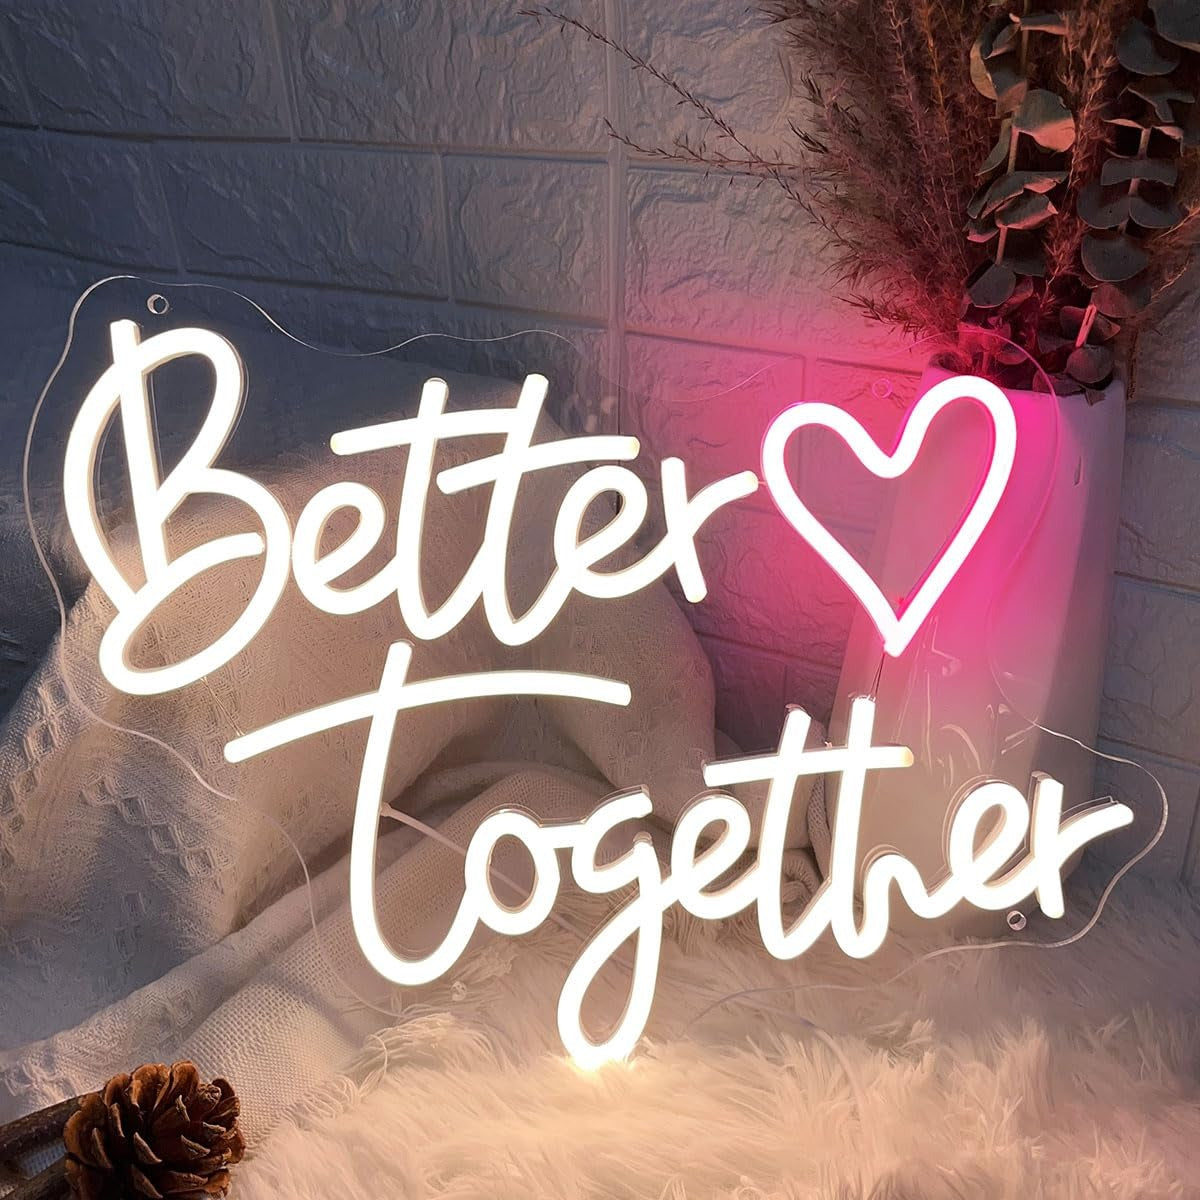 Neon sign "Better Together" for couple